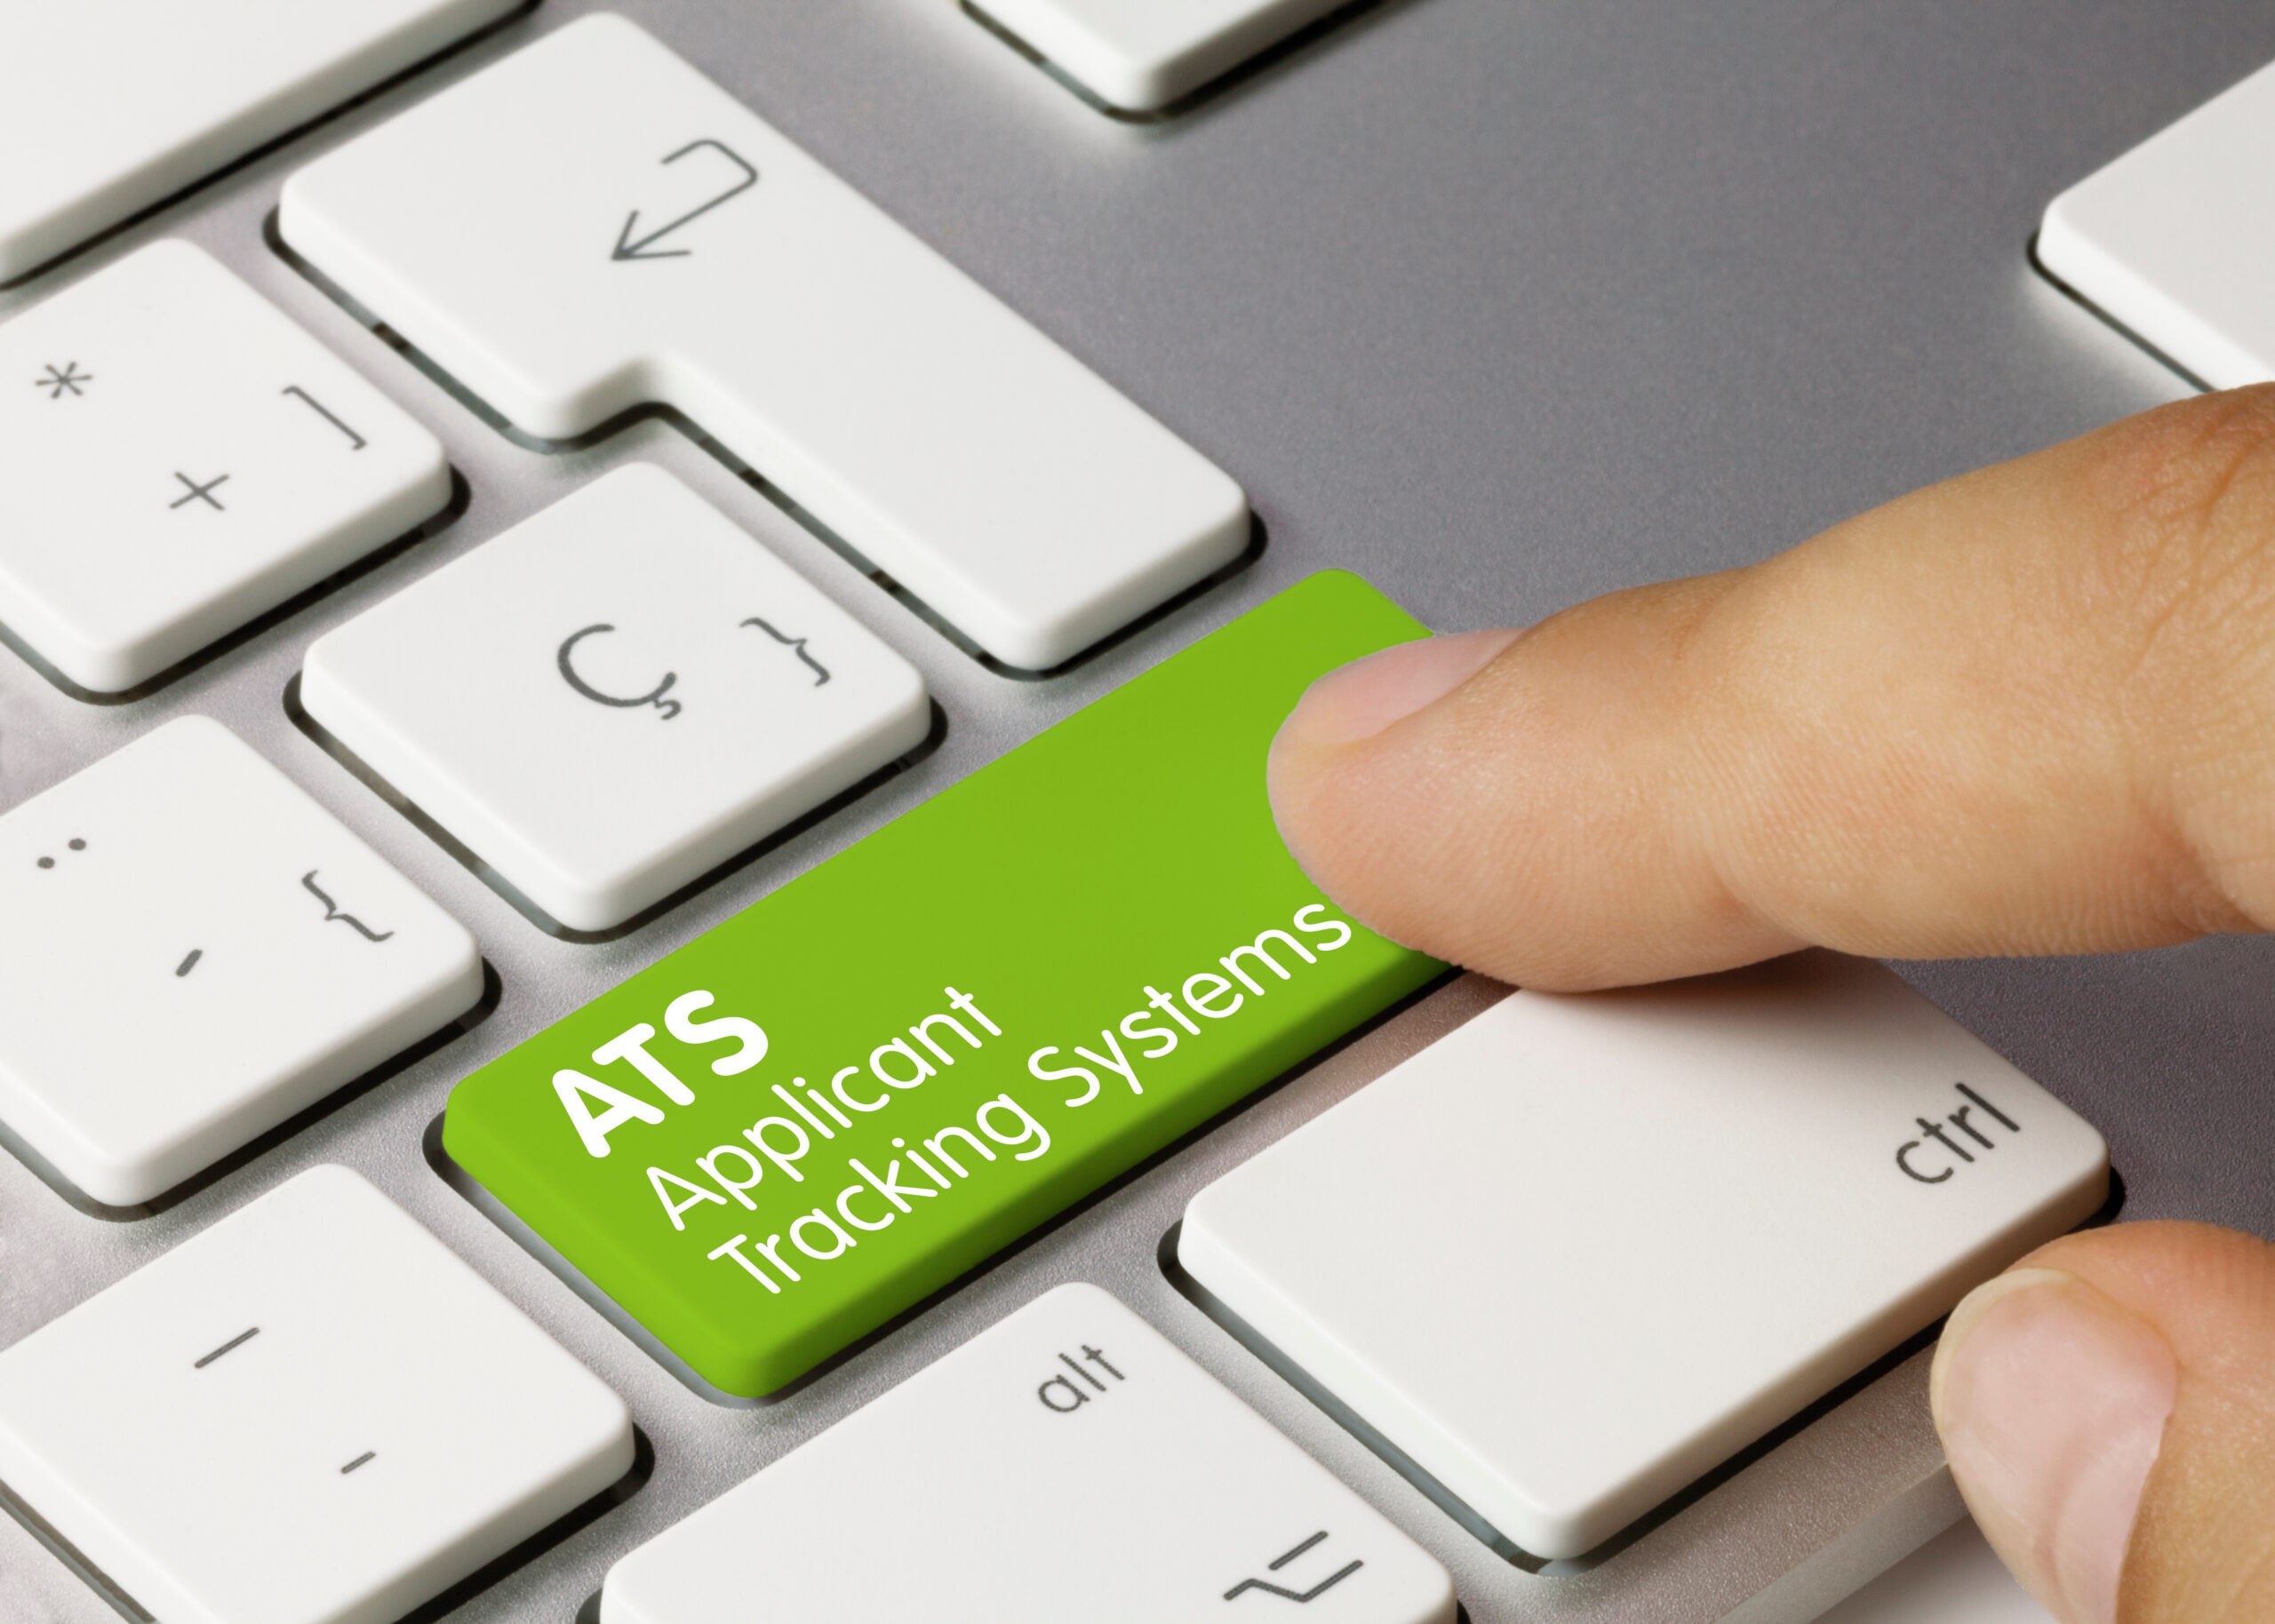 Finger pressing a green 'ATS Applicant Tracking Systems' button on a keyboard